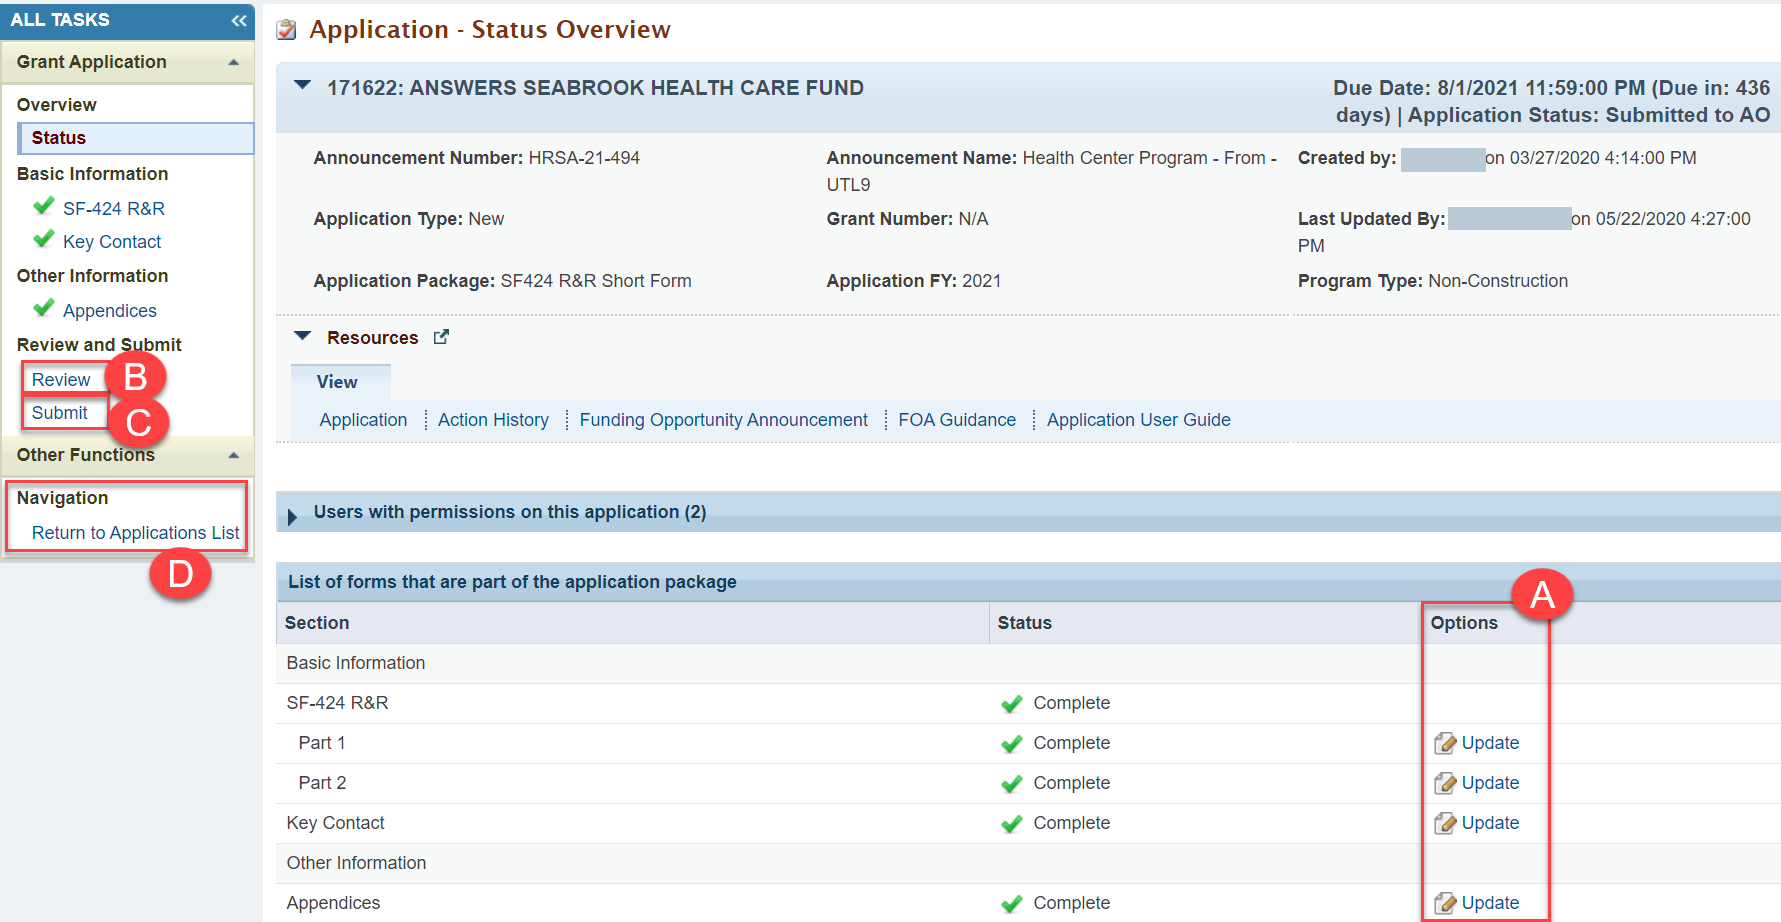 Screenshot of the Application - Status Overview page for AOs